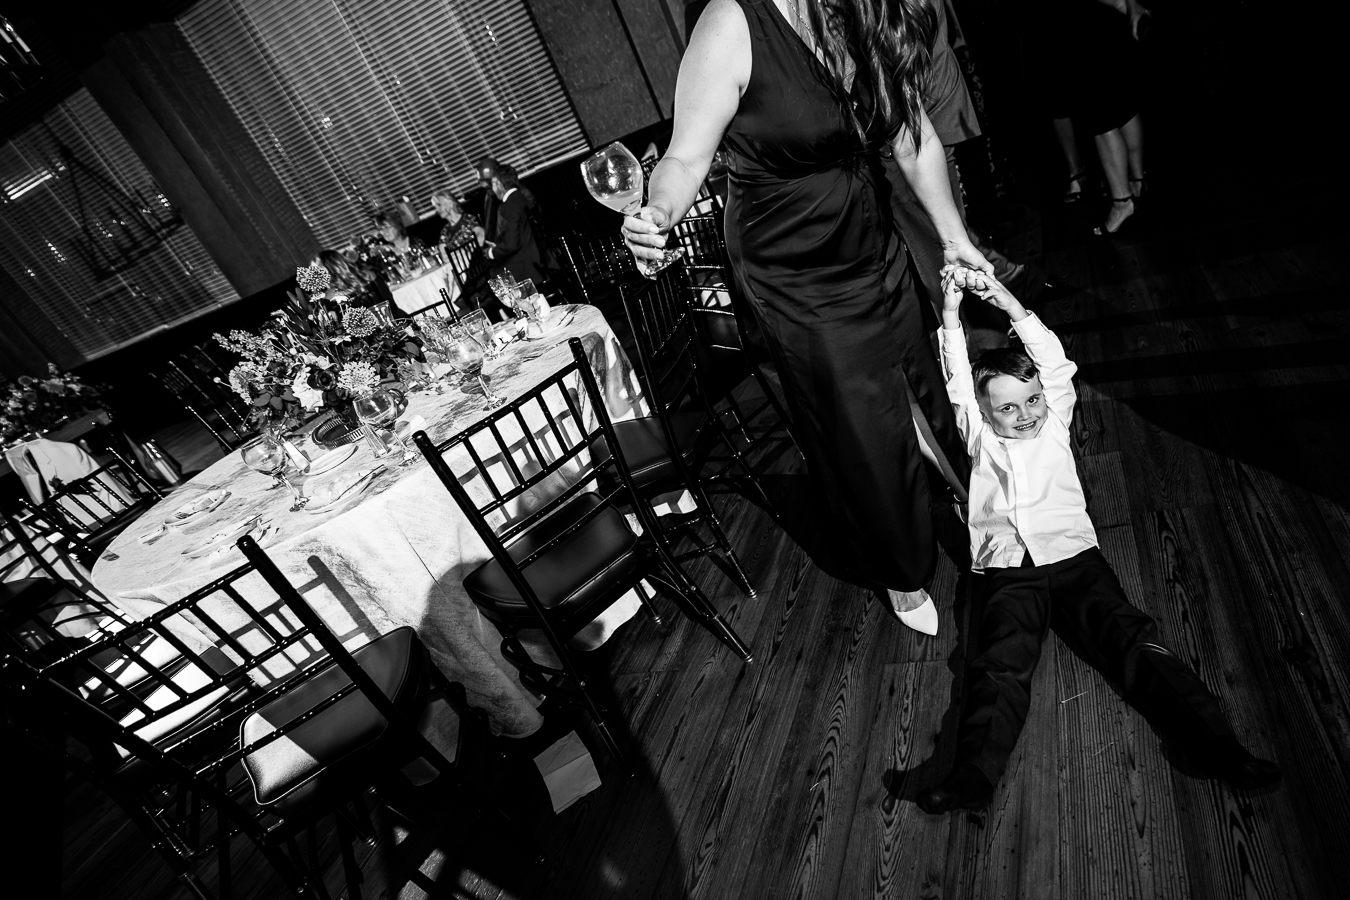 black and white image of the boy being dragged across the floor during the reception